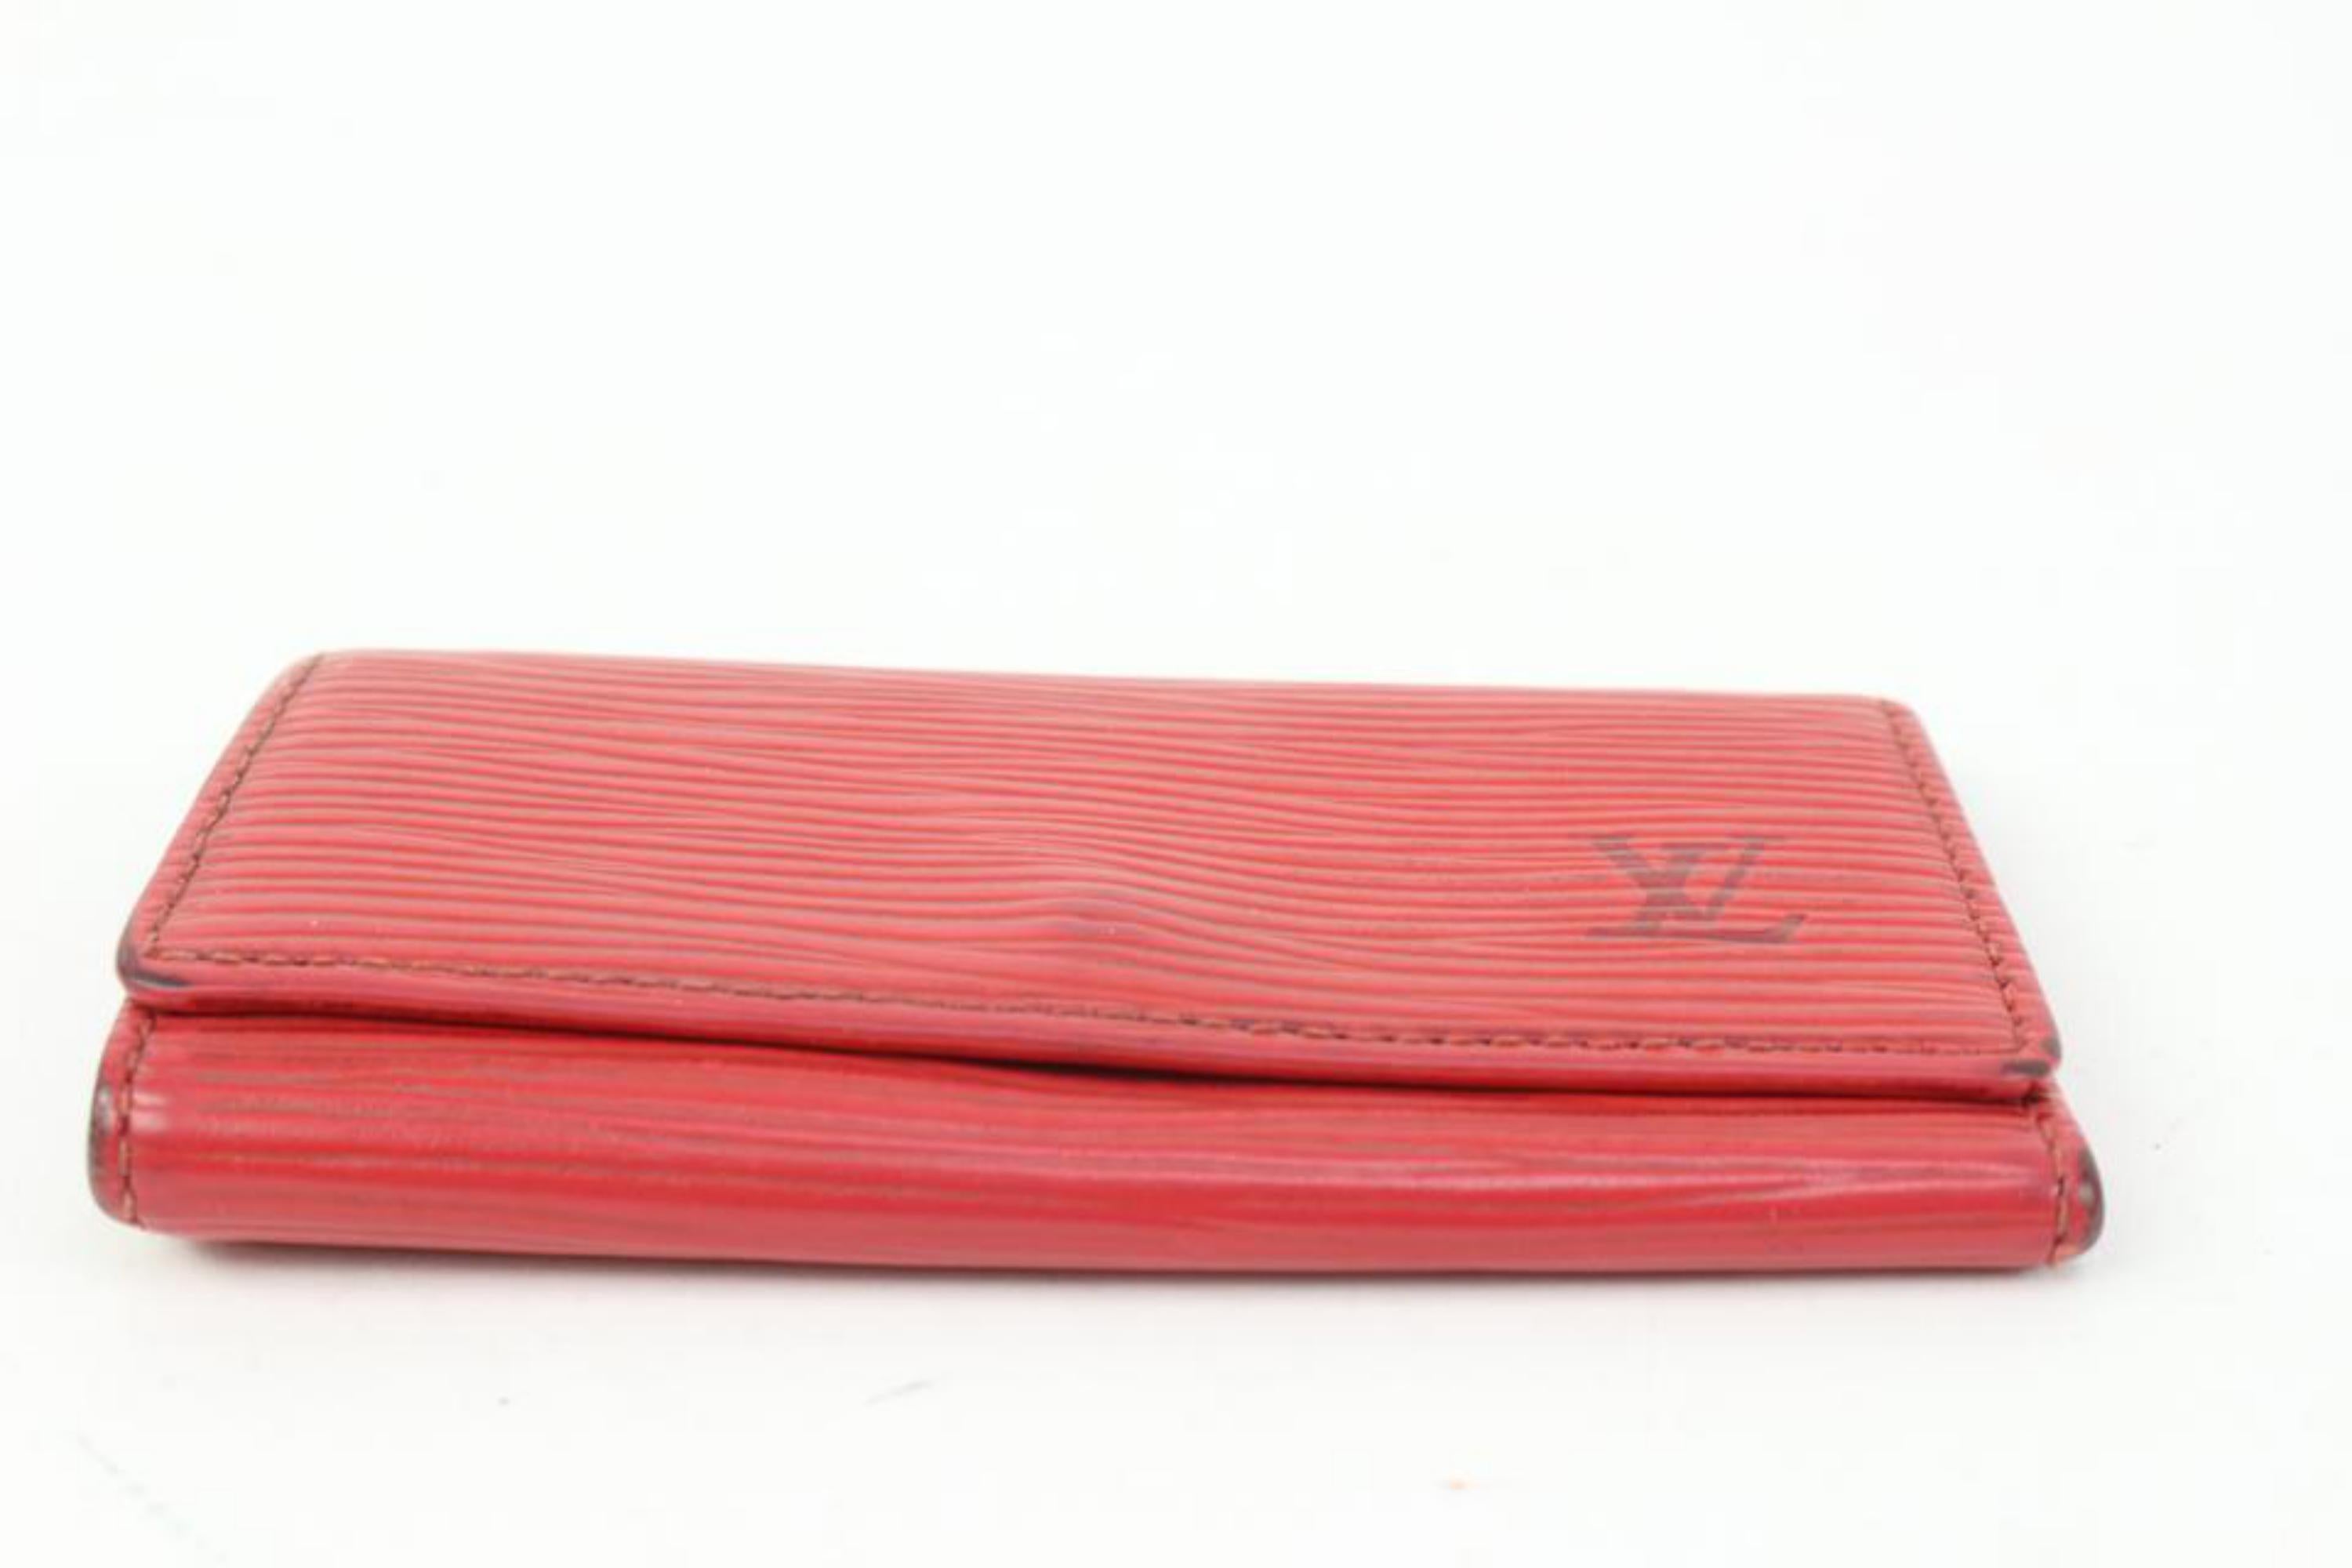 Louis Vuitton Red Epi Leather 4 Key Holder Multicles s330lk29 2